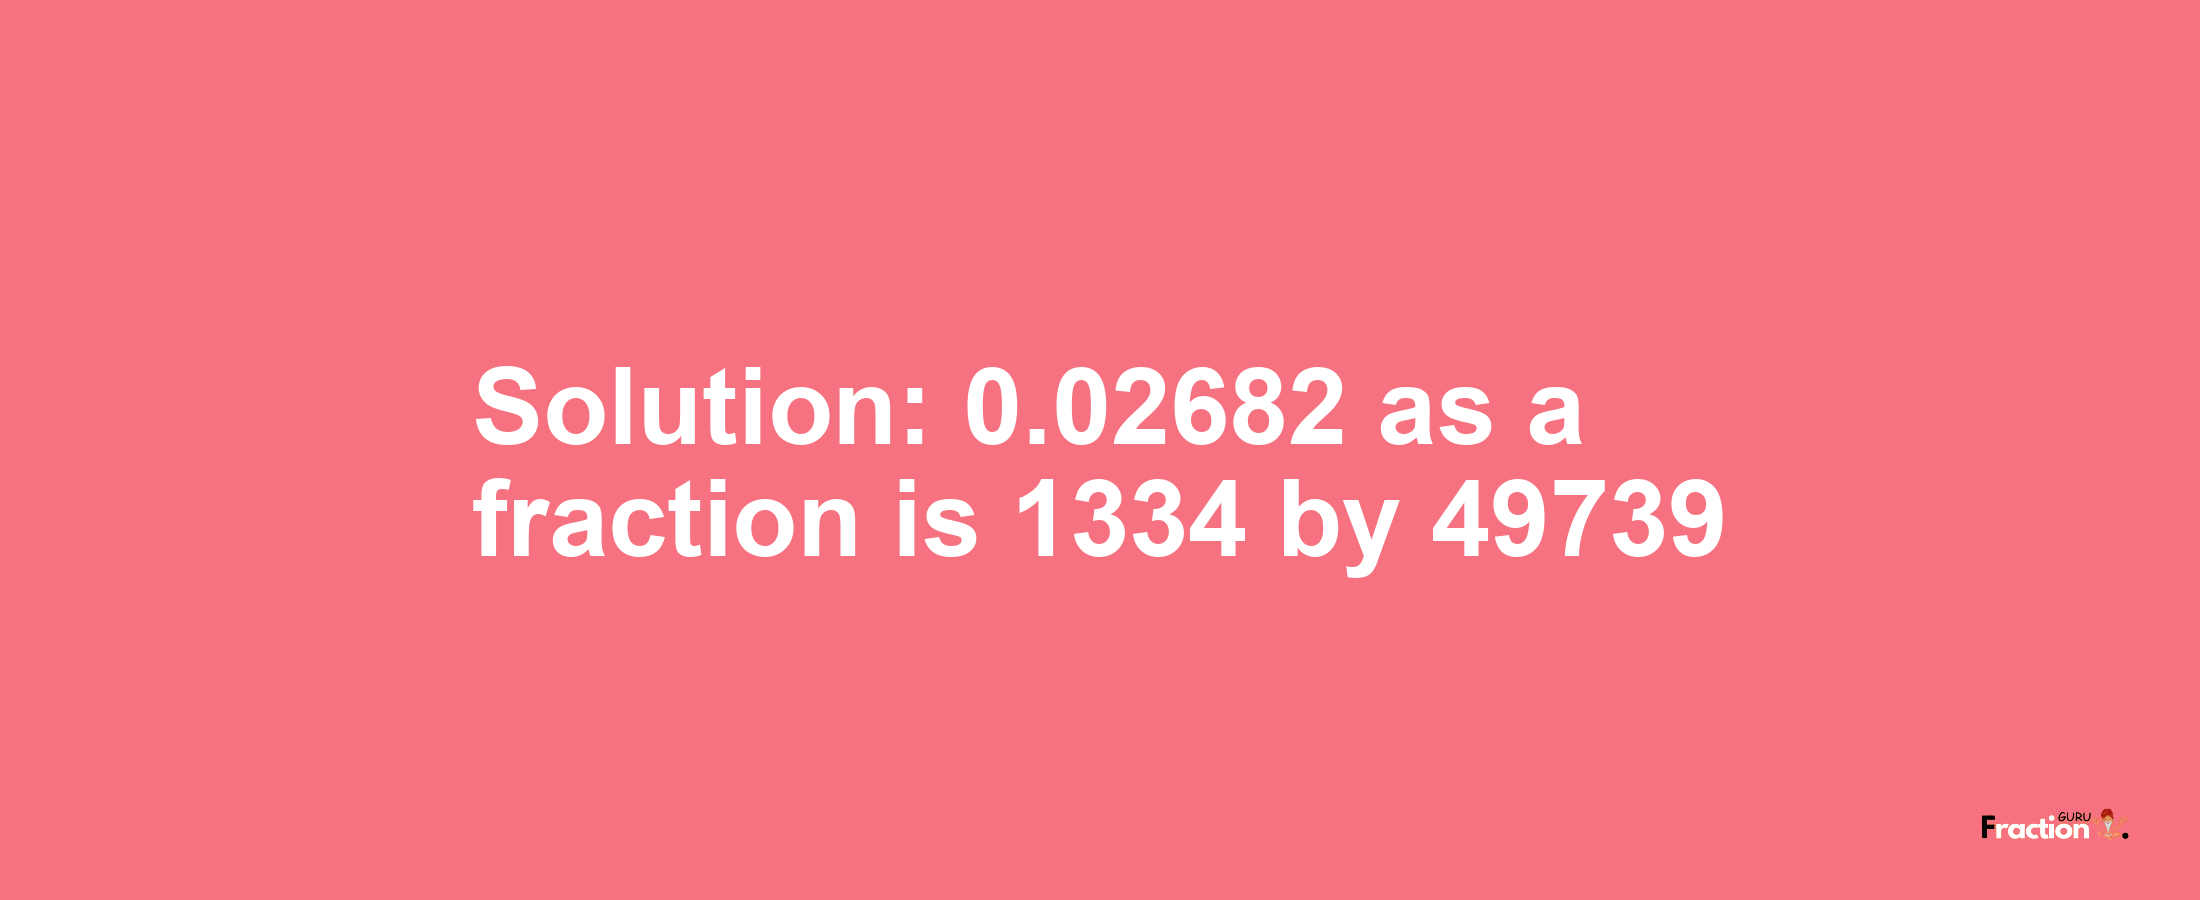 Solution:0.02682 as a fraction is 1334/49739